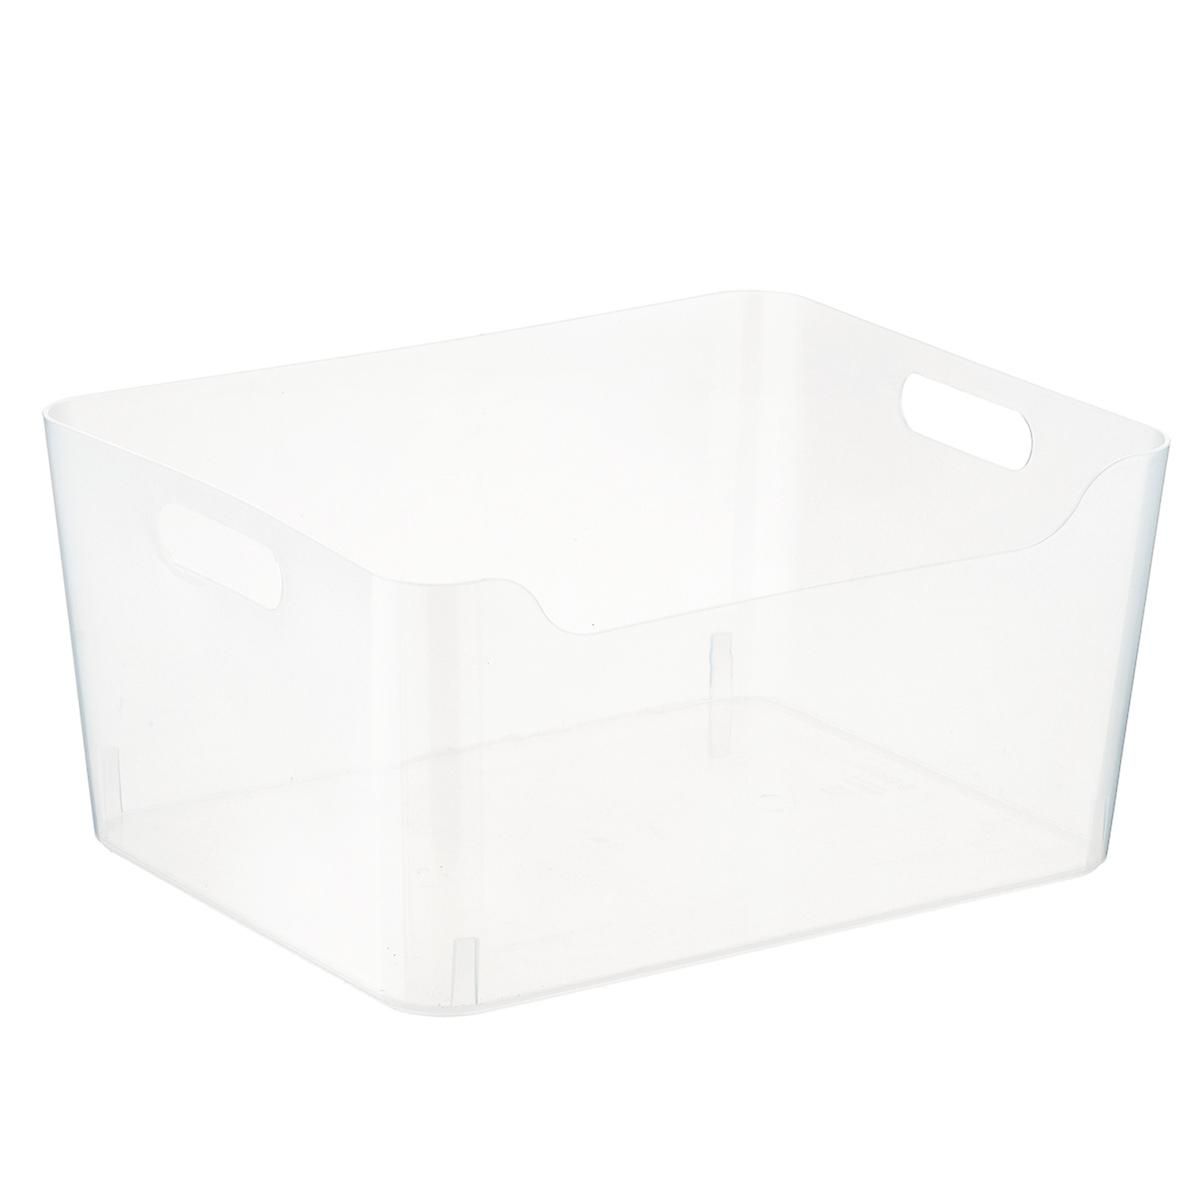 Clear Plastic Storage Bins with Handles | The Container Store